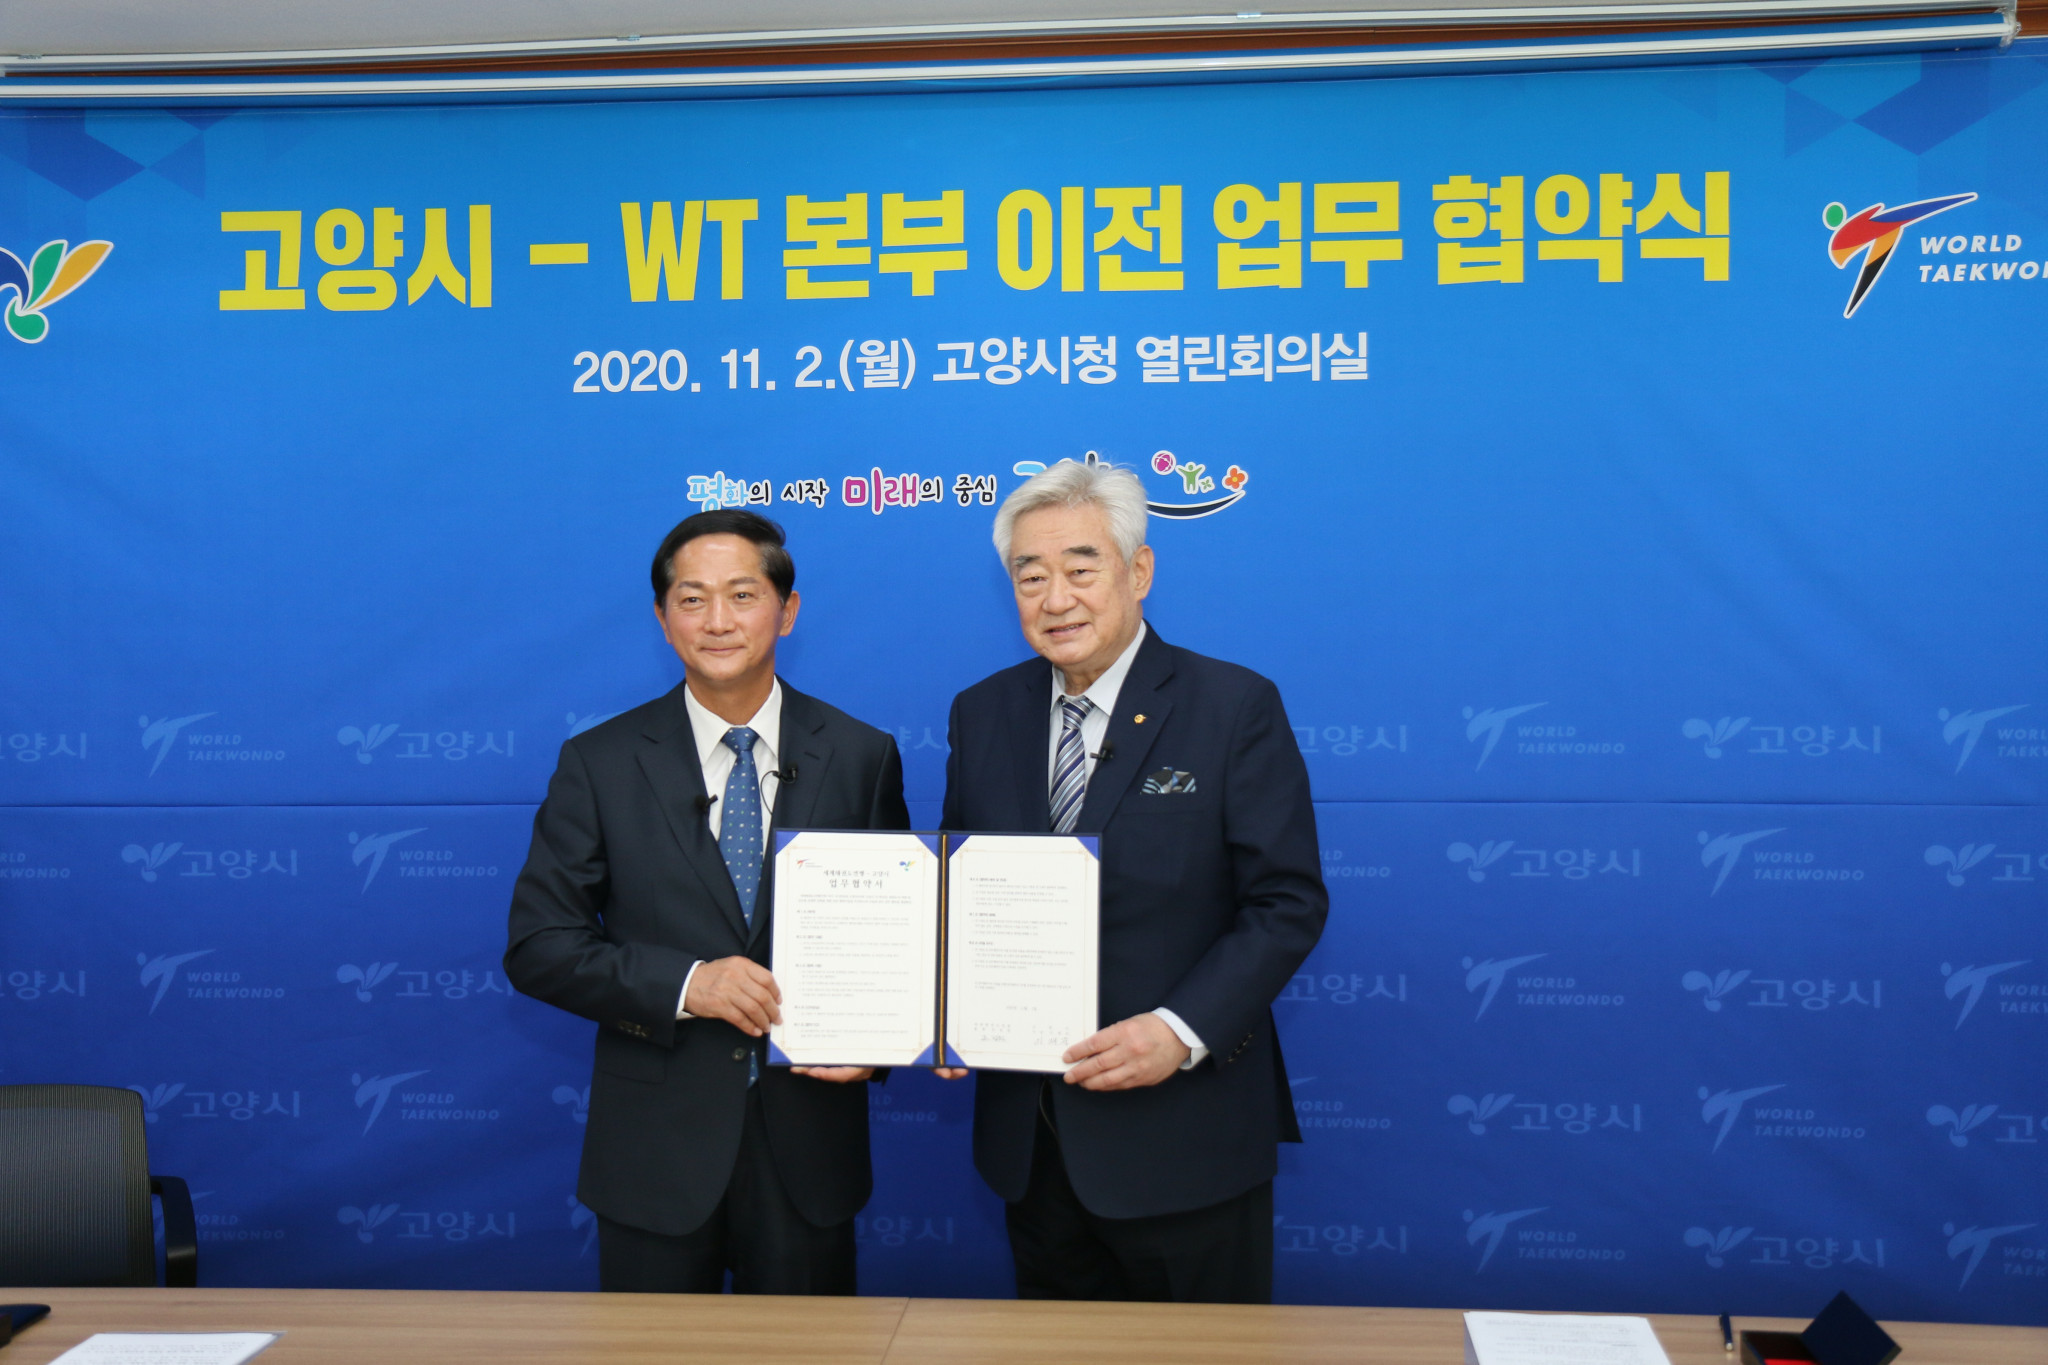 World Taekwondo signs deal to move headquarters to Goyang